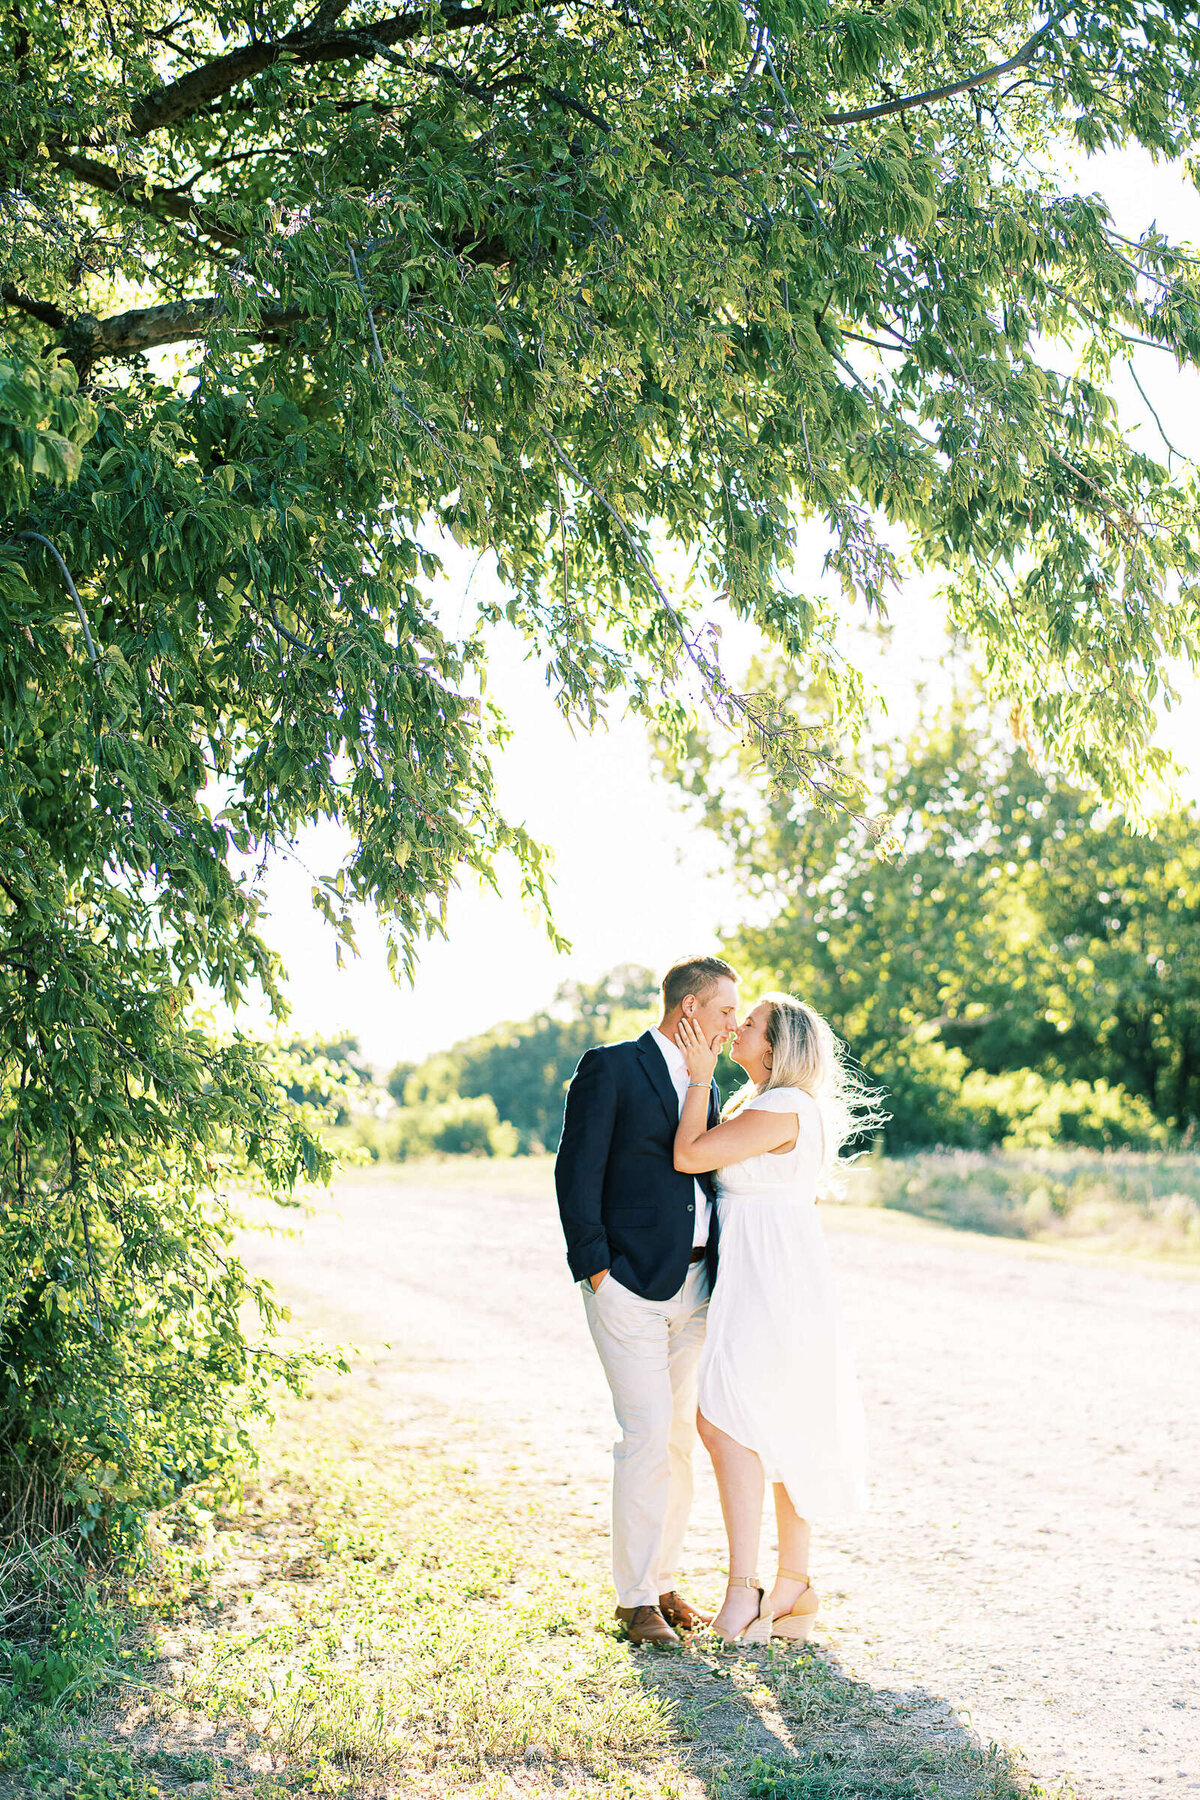 01 Romantic Dallas Engagement Session Kate Panza North Texas Wedding Photography